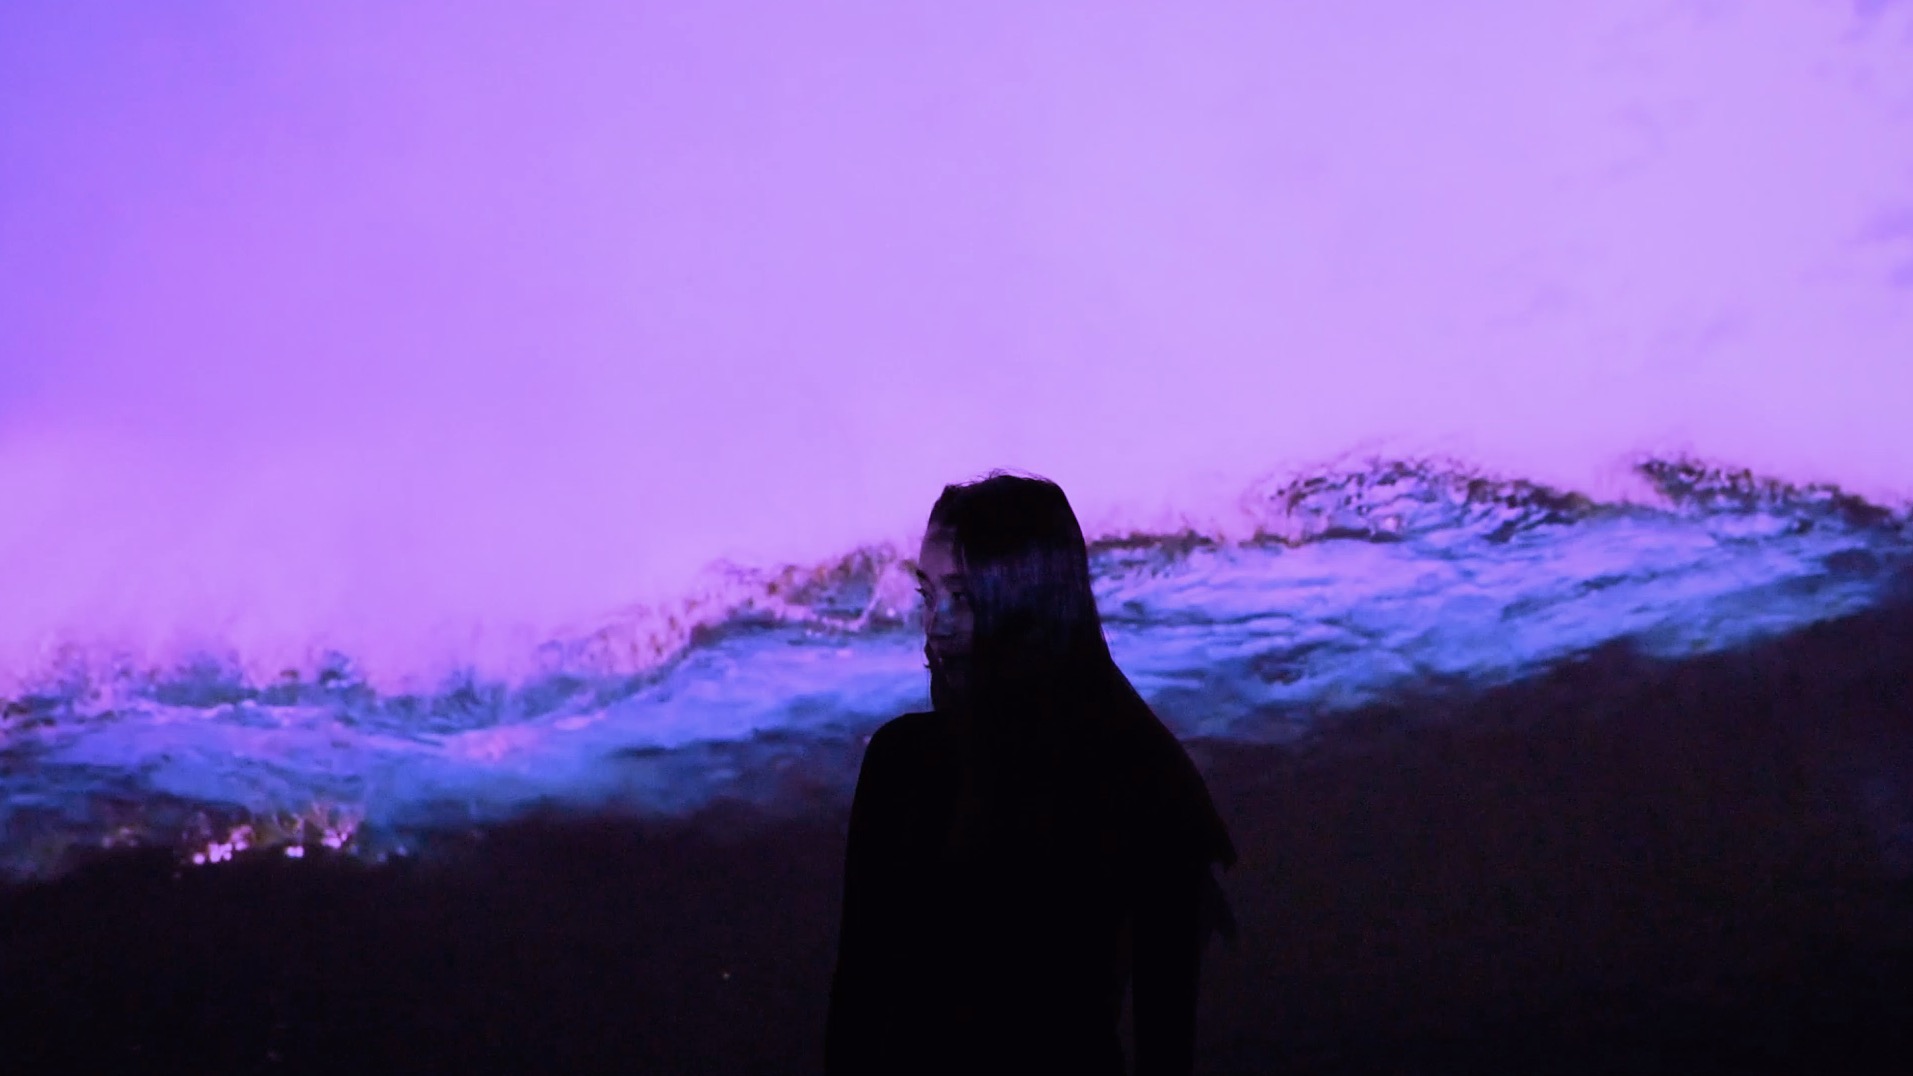 silhouette of person with purple sky behind them